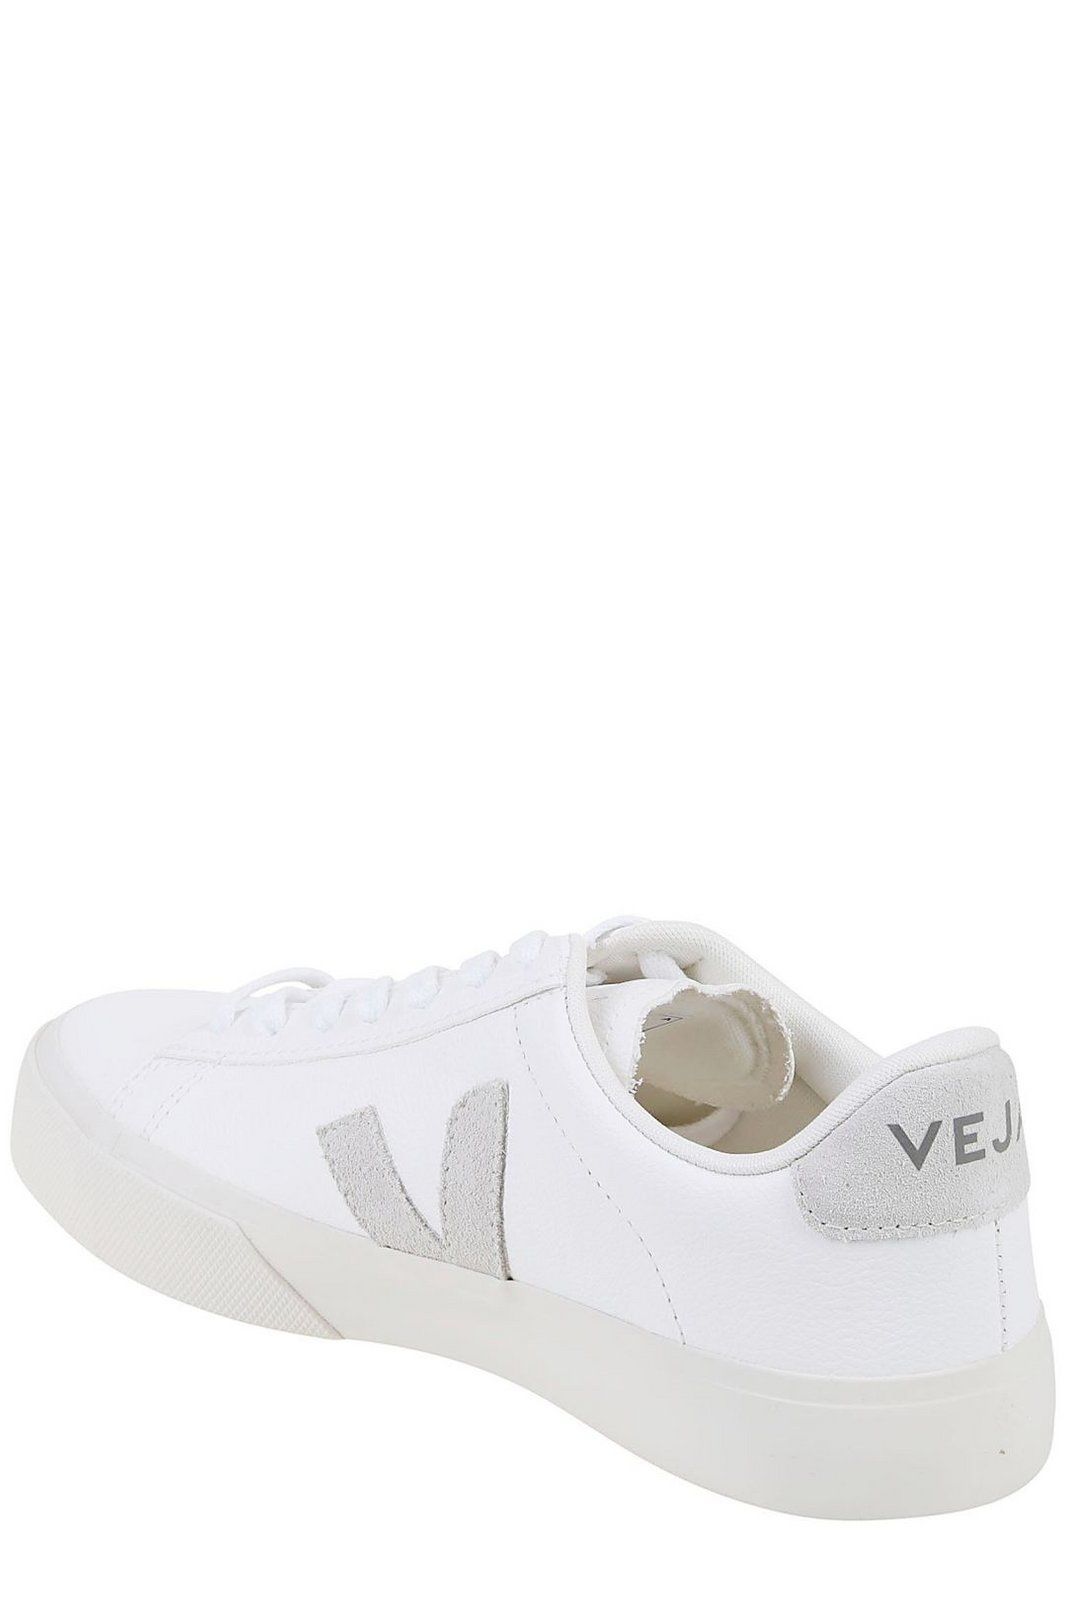 Veja Campo Lace-Up Sneakers | Cettire Global